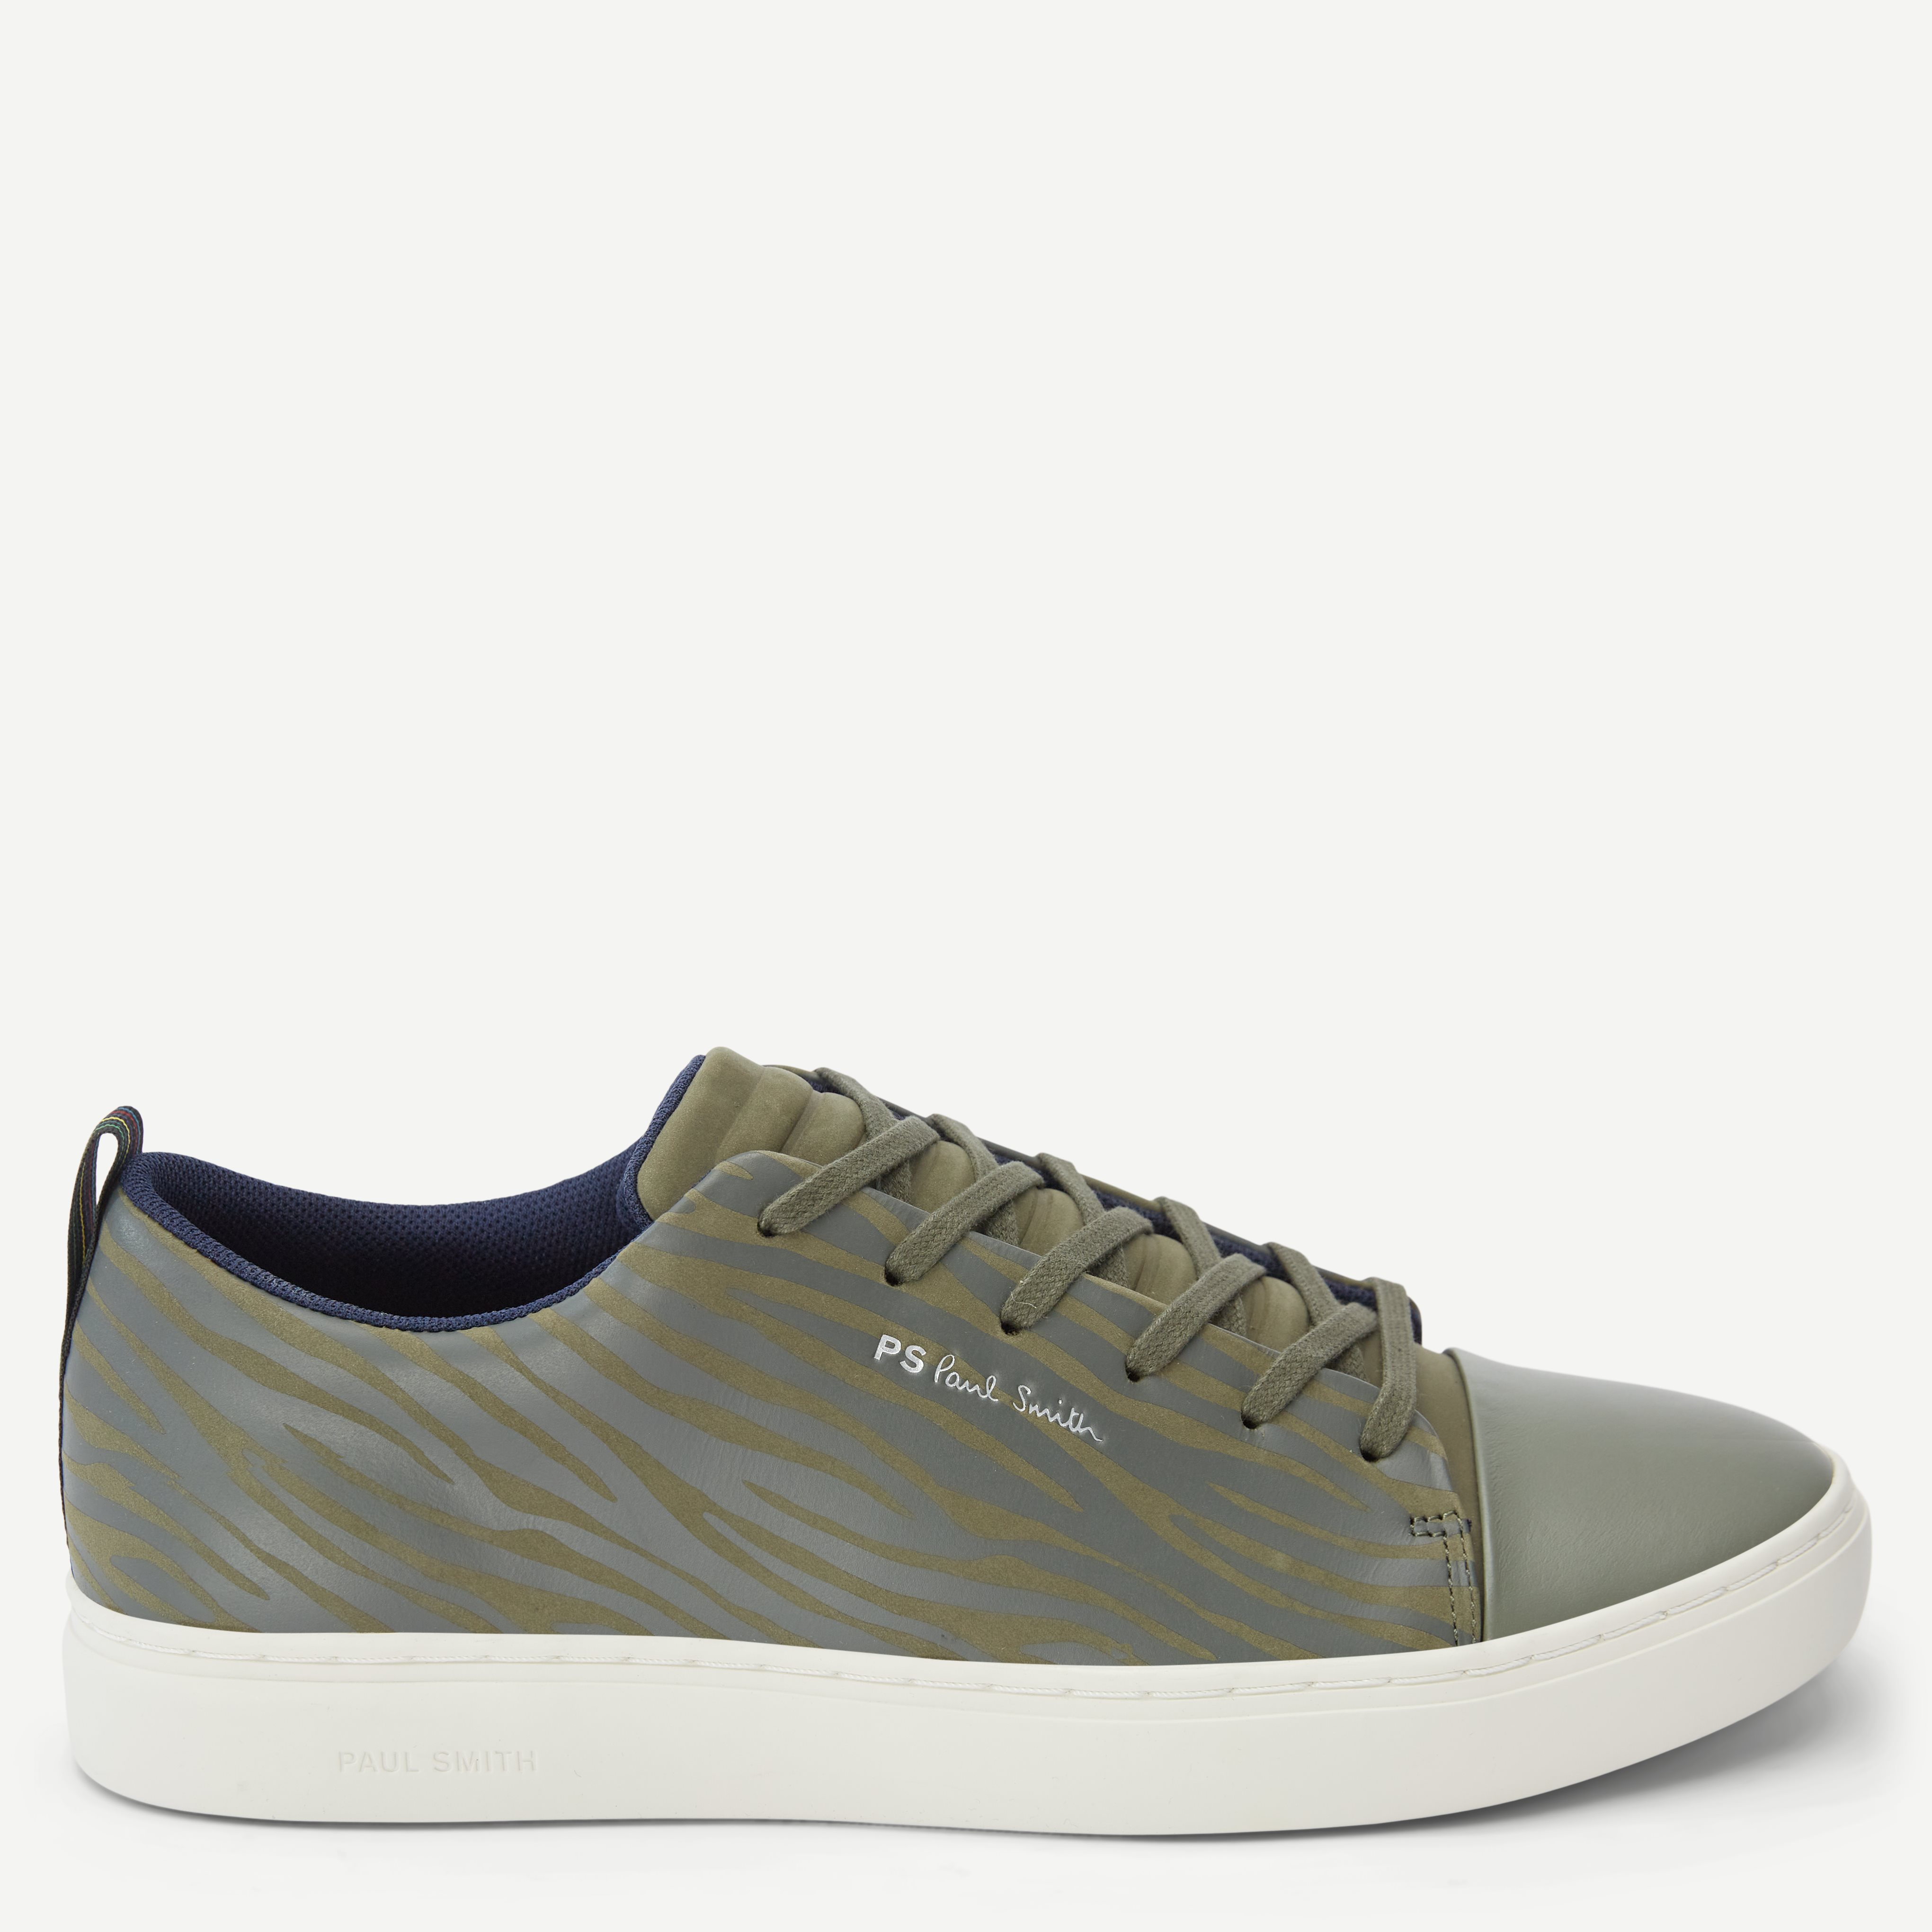 Paul Smith Shoes Shoes LEE23-JNUB Army